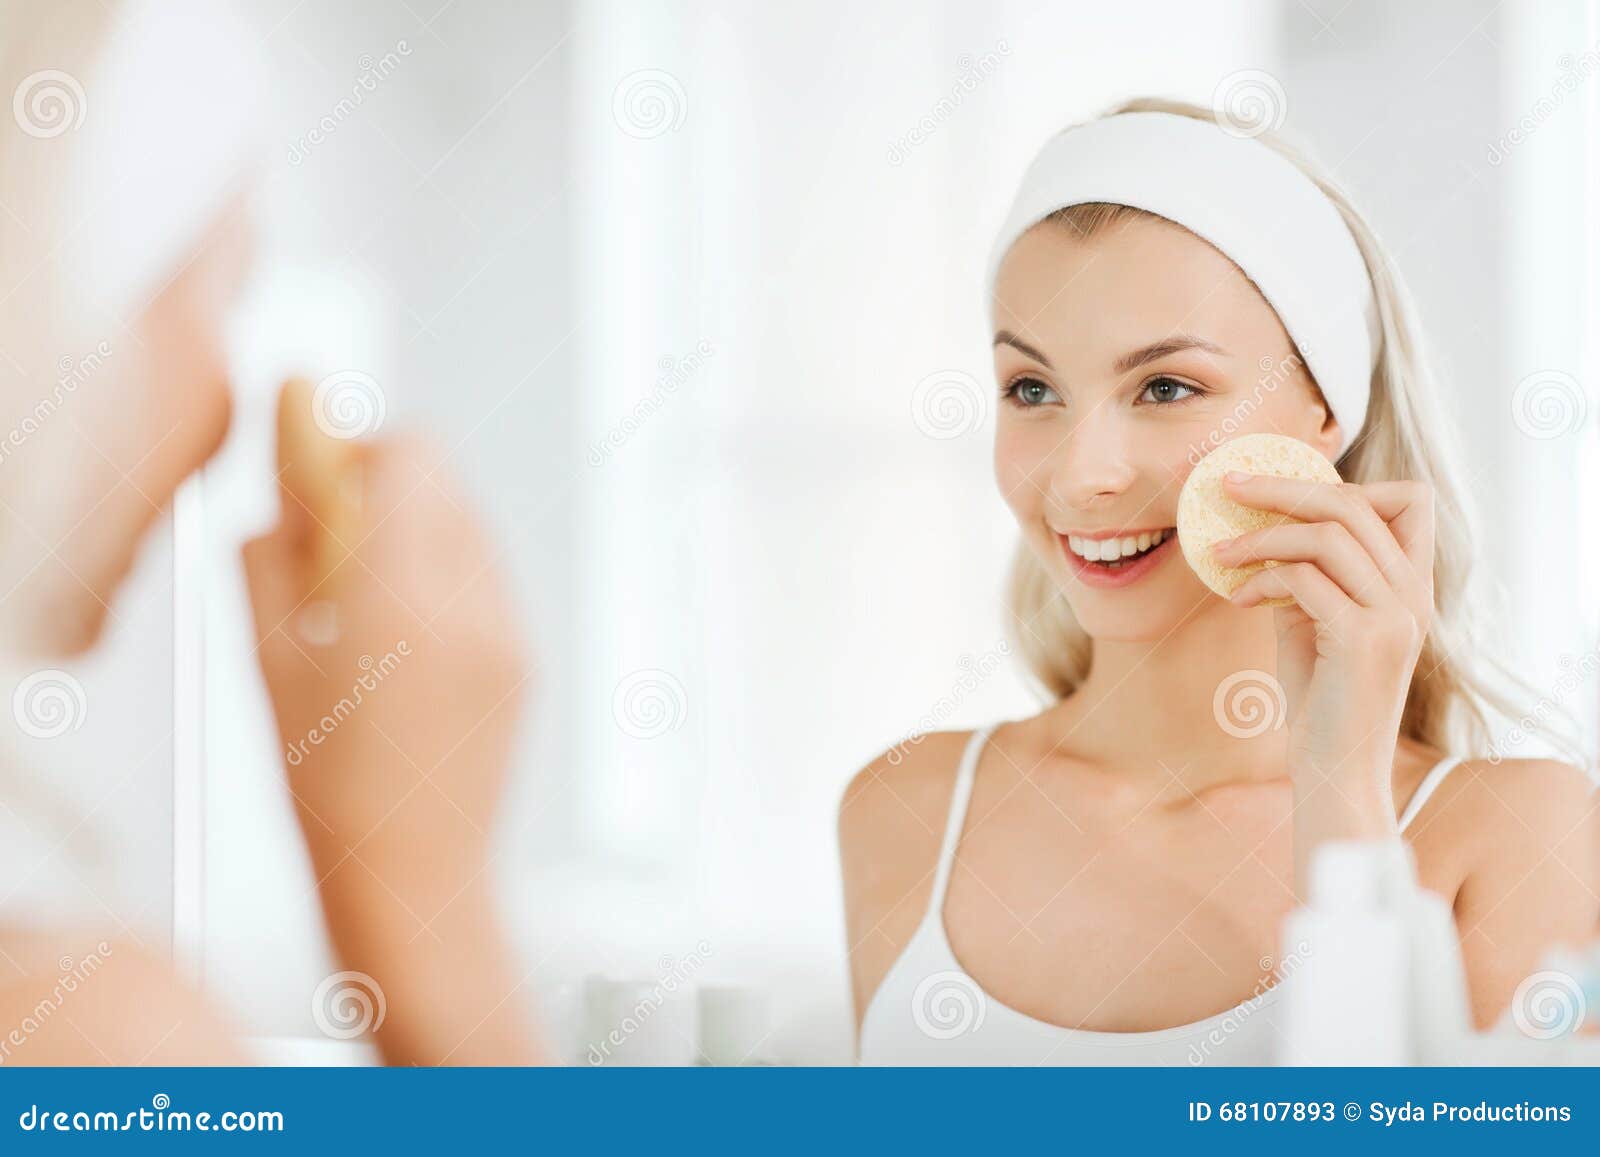 young woman washing face with sponge at bathroom